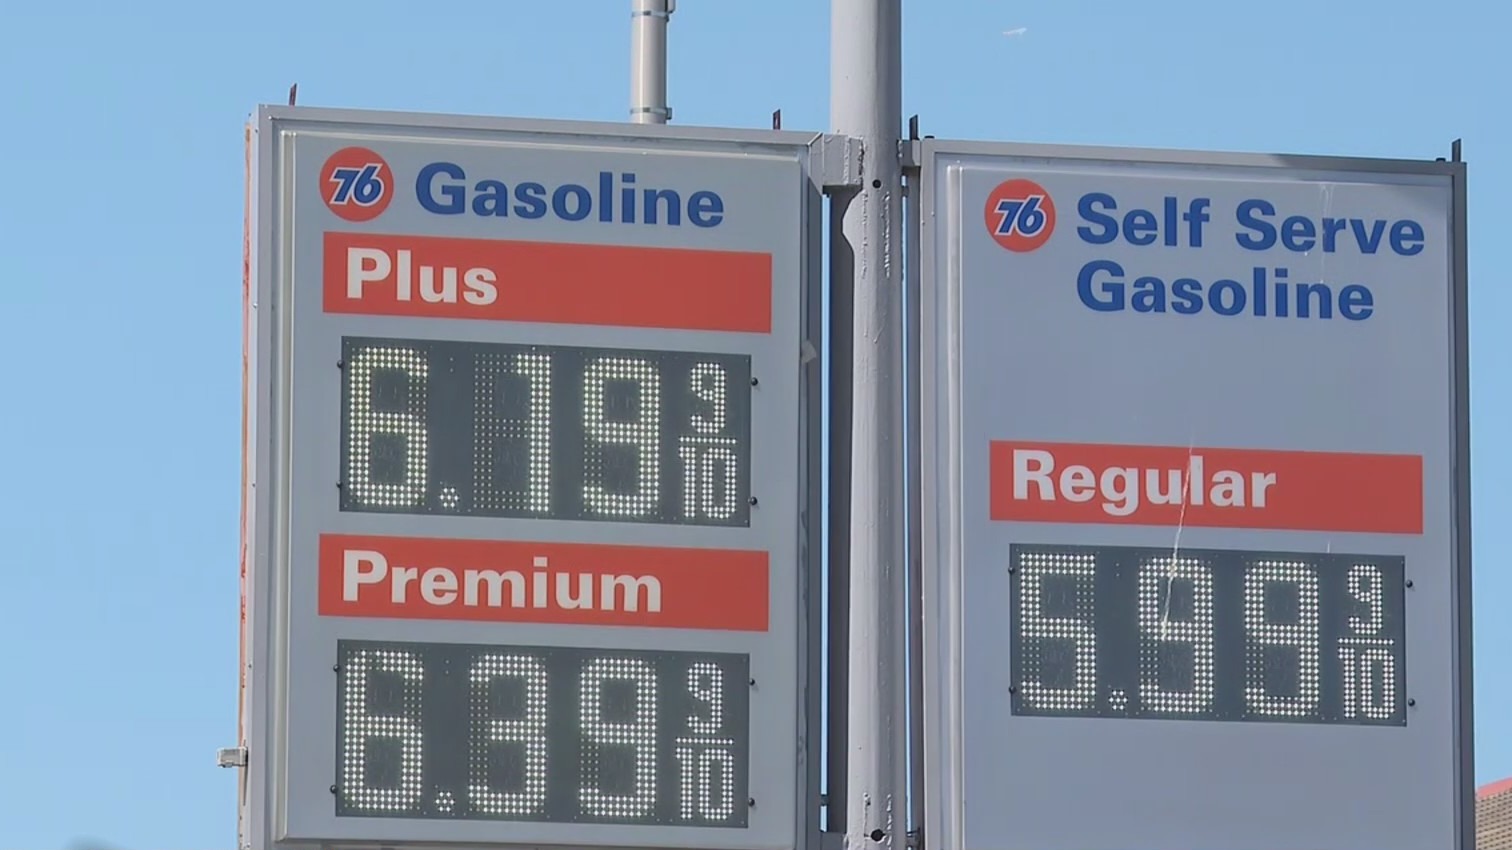 Rising Cost Of Gas Prompts Renewed Discussion Of ‘Mystery Surcharge’ Behind California’s Higher Prices